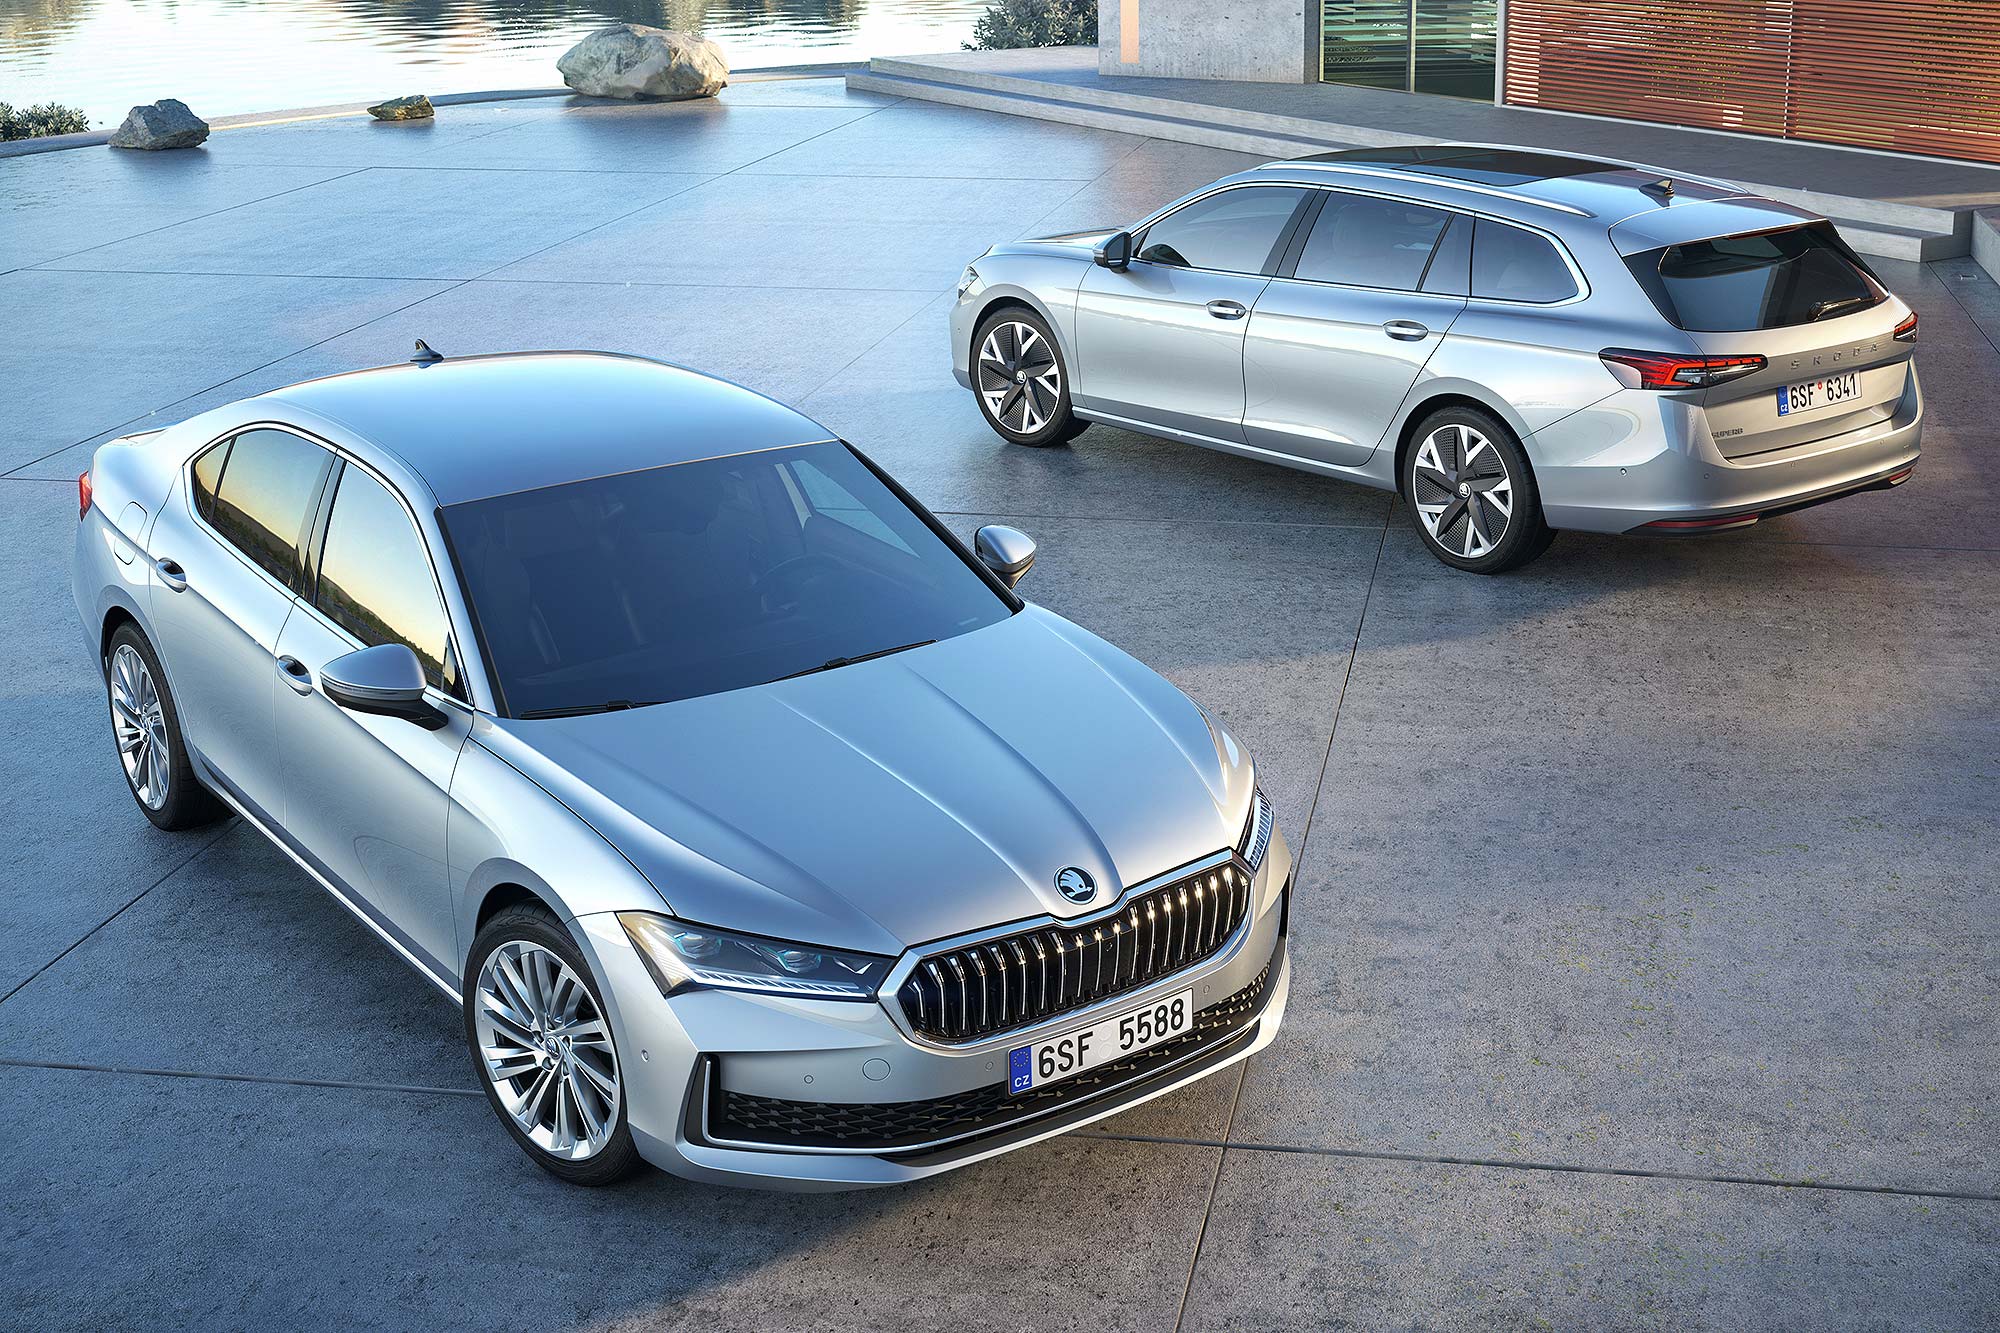 The new Skoda Superb is available both as a hatch and an estate